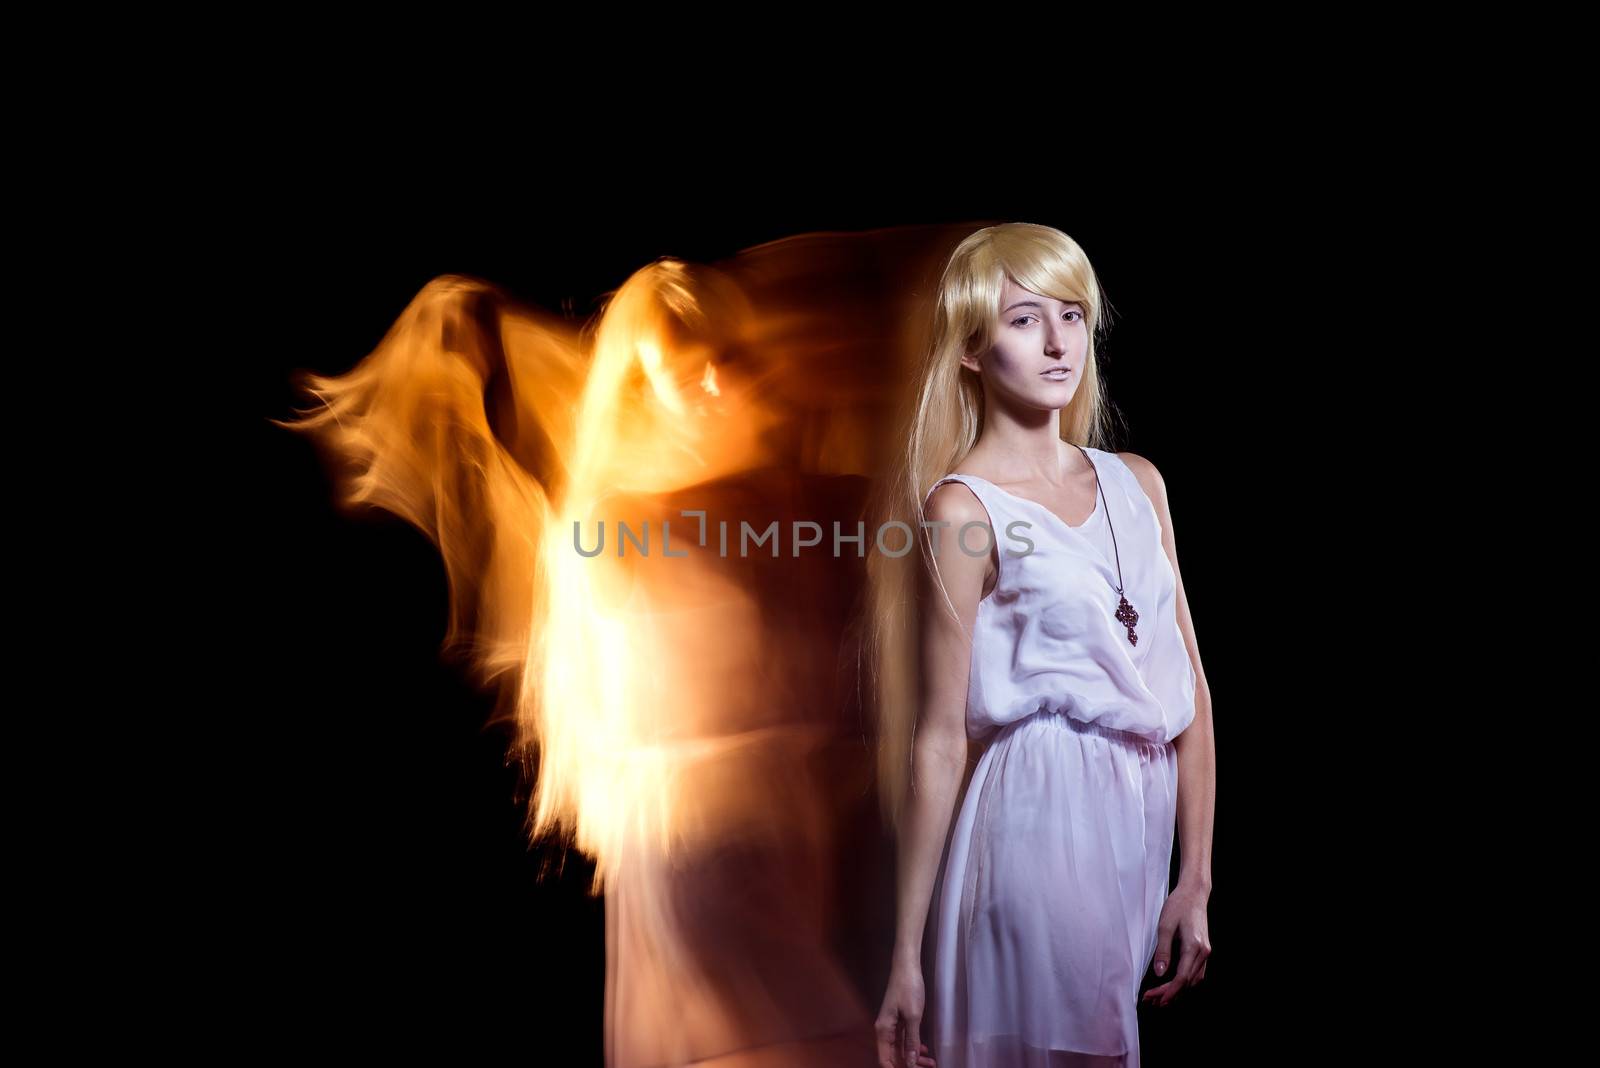 Behind the beautiful young girl with a fair hair the fiery angel by odindia